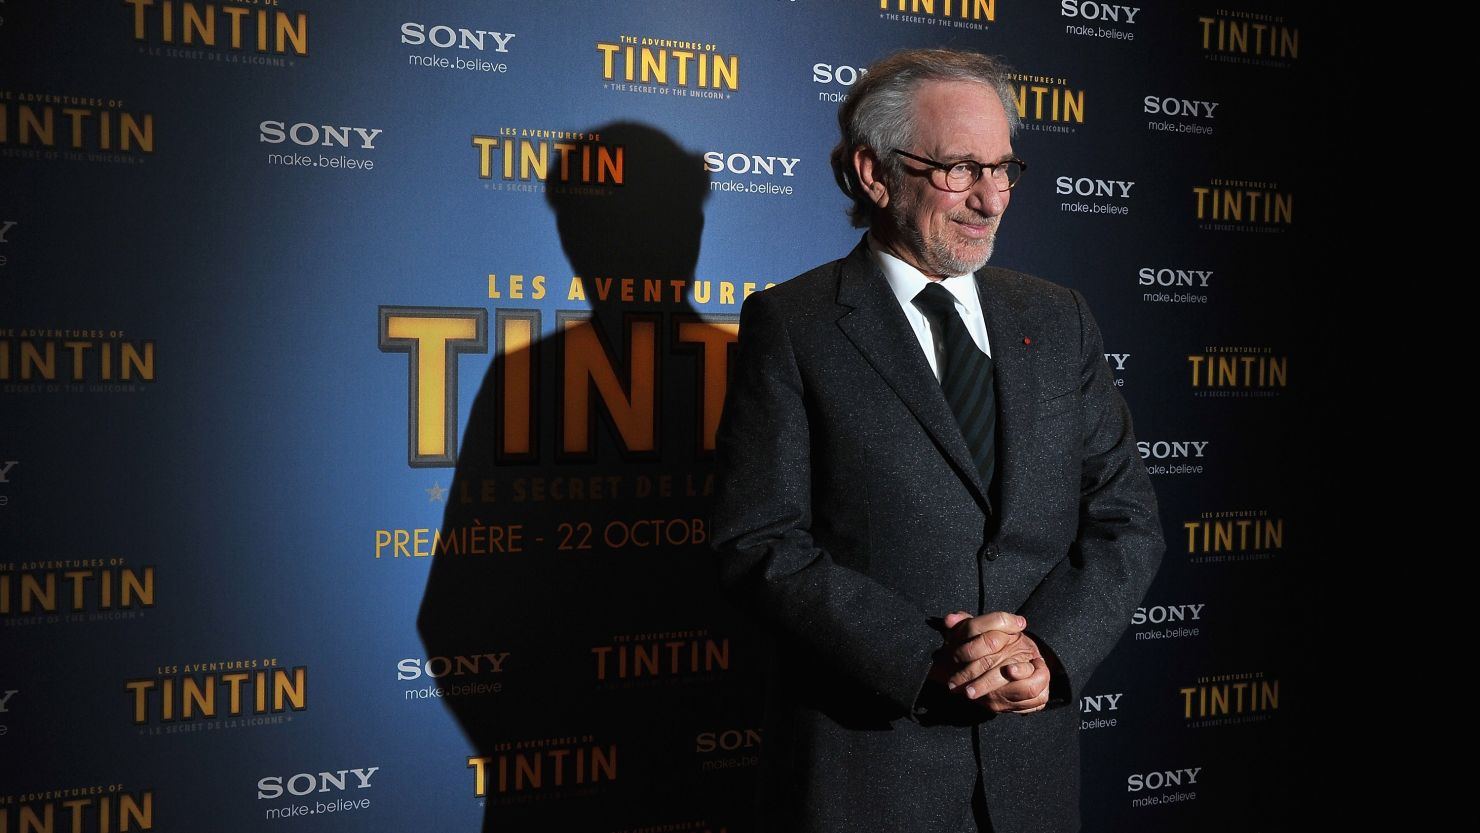 Steven Spielberg attended 'TINTIN: The Secret Of The Unicorn' premiere at Le Grand Rex  in 2011 in Paris, France.